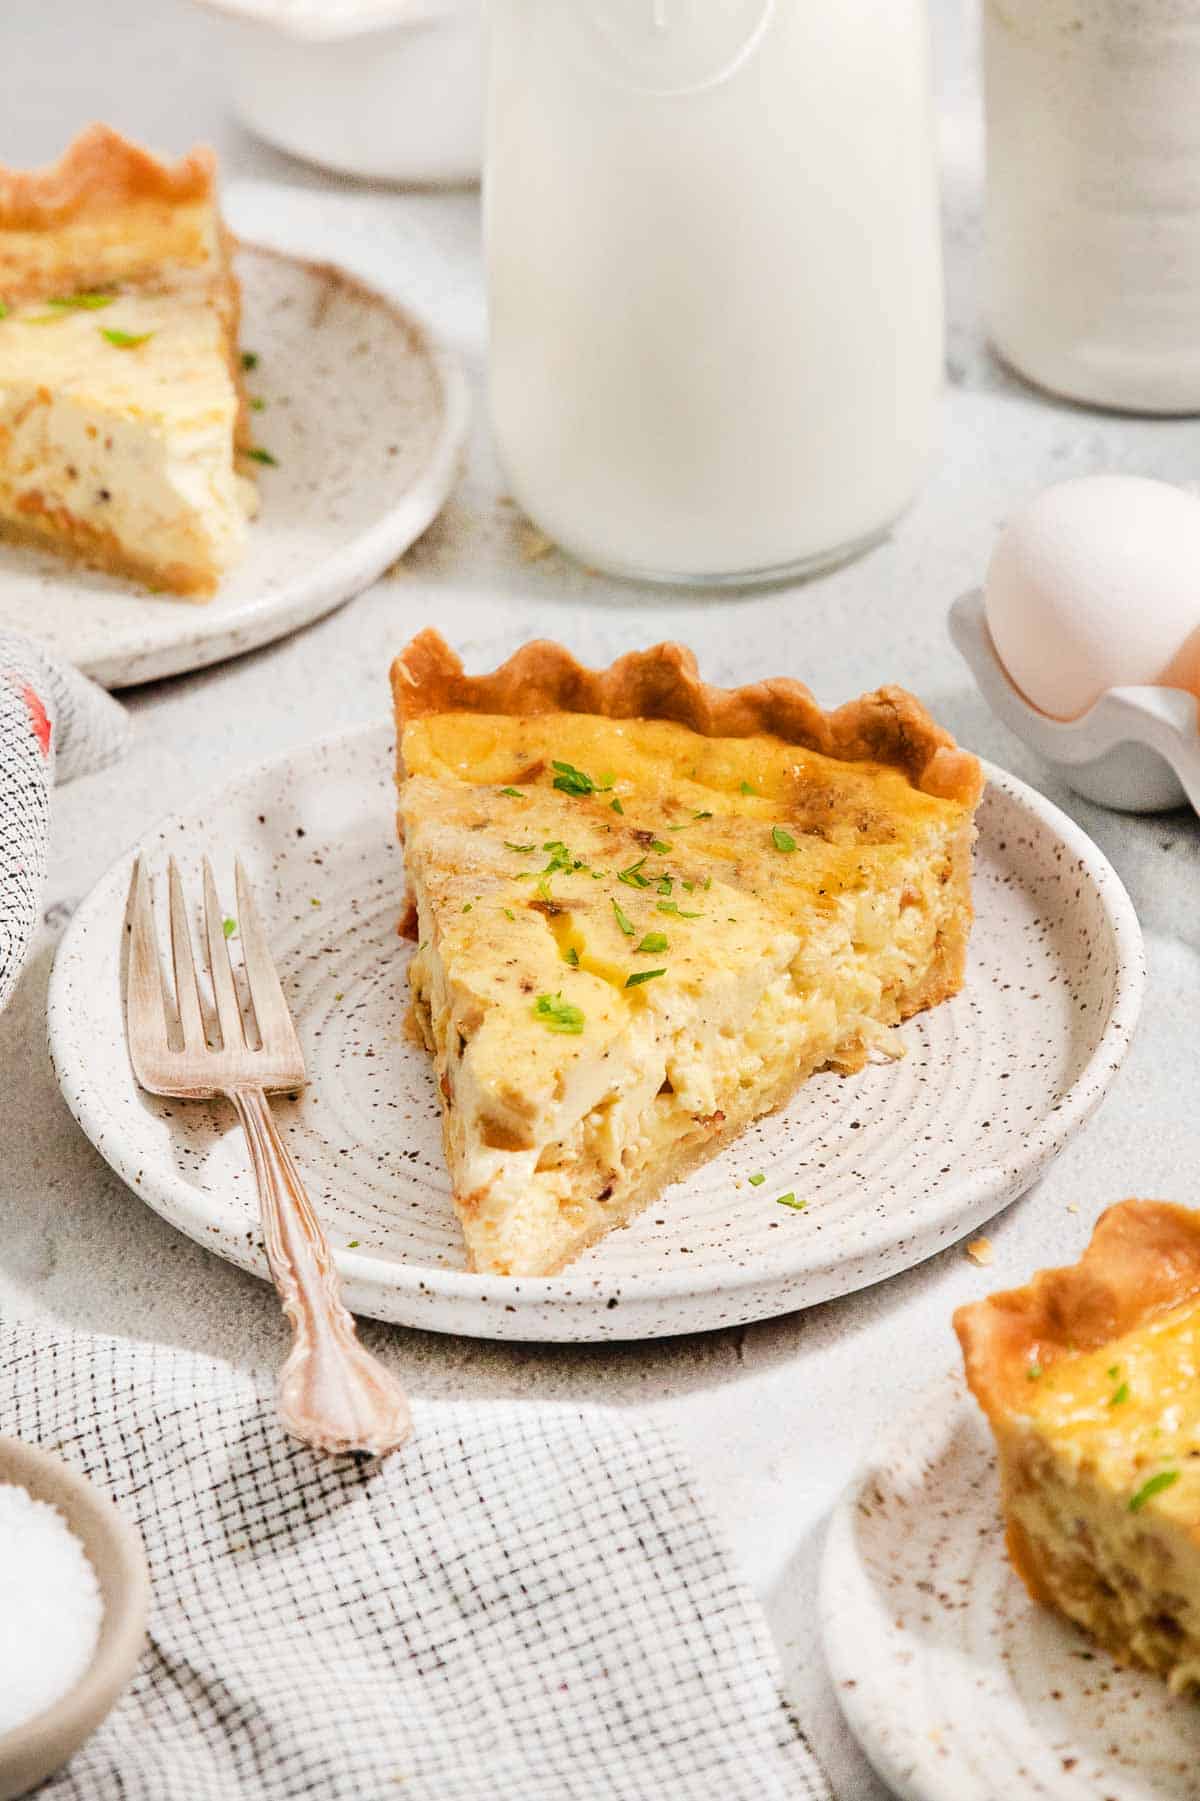 a slice of gluten-free quiche lorraine on a plate with a fork next to it